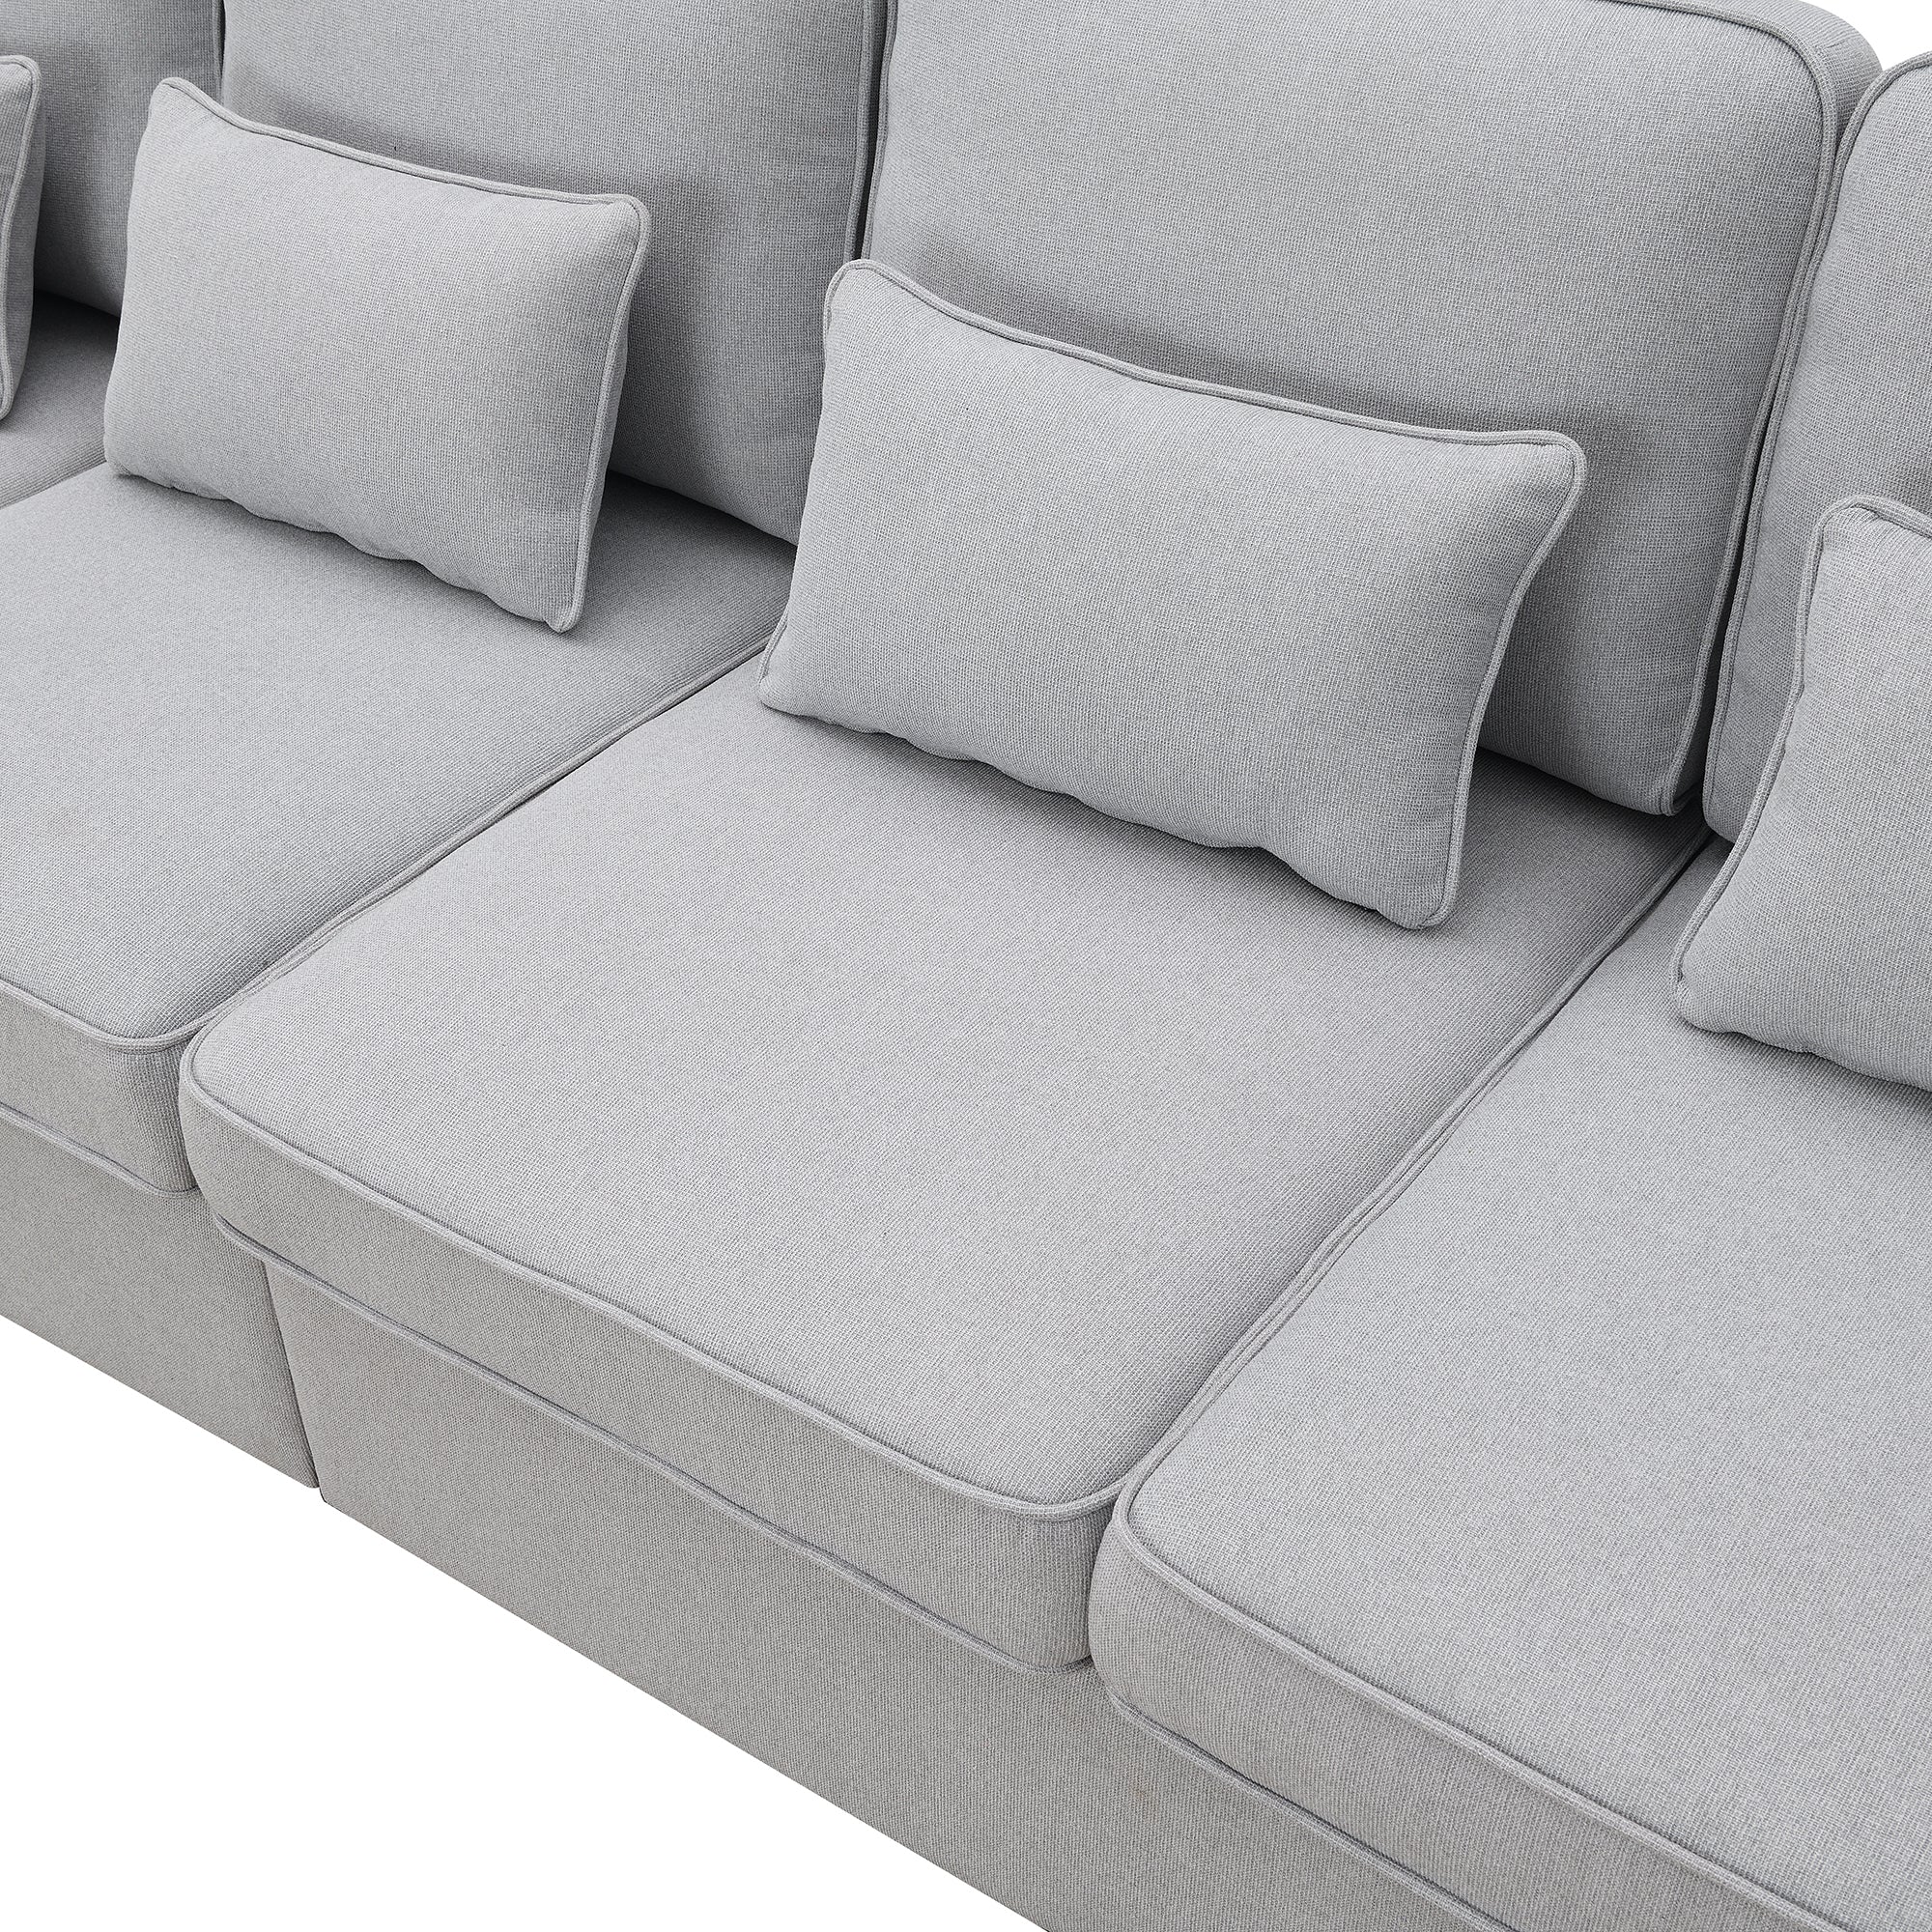 [VIDEO provided] [New] 104" 4-Seater Modern Linen Fabric Sofa with Armrest Pockets and 4 Pillows,Minimalist Style Couch for Living Room, Apartment, Office,3 Colors